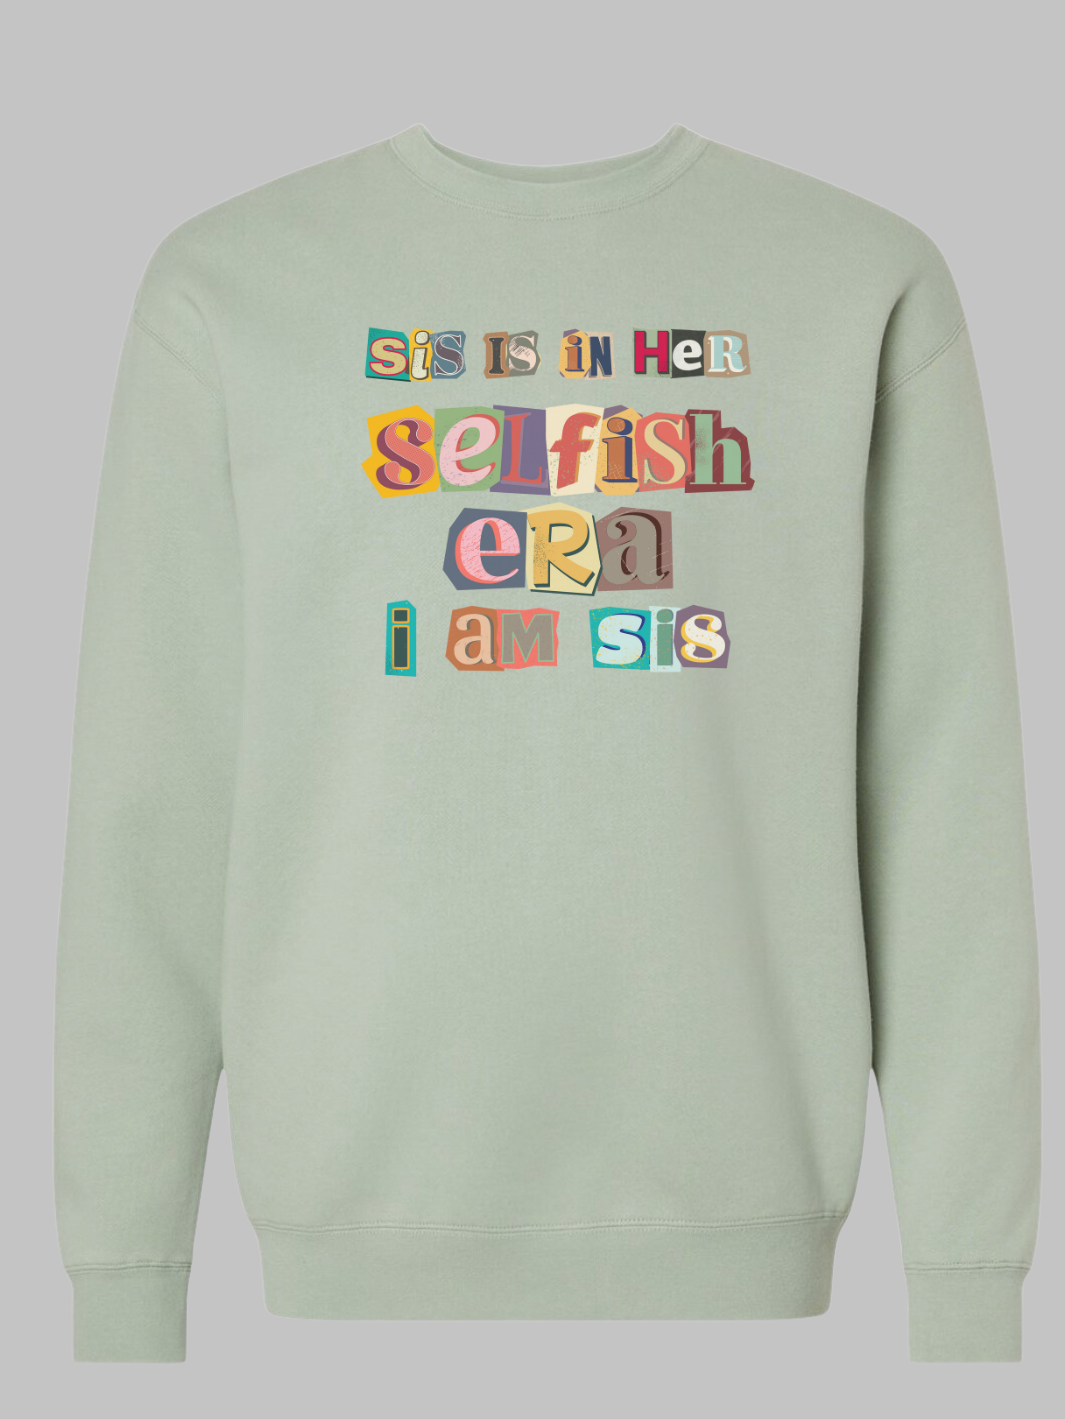 Image of a sage green -colored crewneck sweatshirt featuring the phrase 'Sis in her Selfish era. I am Sis' in a unique, multicolored ripped paper font. The text, appearing as if it's made from torn pieces of paper in various colors, creates a dynamic and artistic effect against the neutral tan background. This design conveys a message of self-empowerment and individuality, with the playful and creative font adding a touch of whimsy and boldness to the statement. Self love sweatshirt. self care sweatshirt